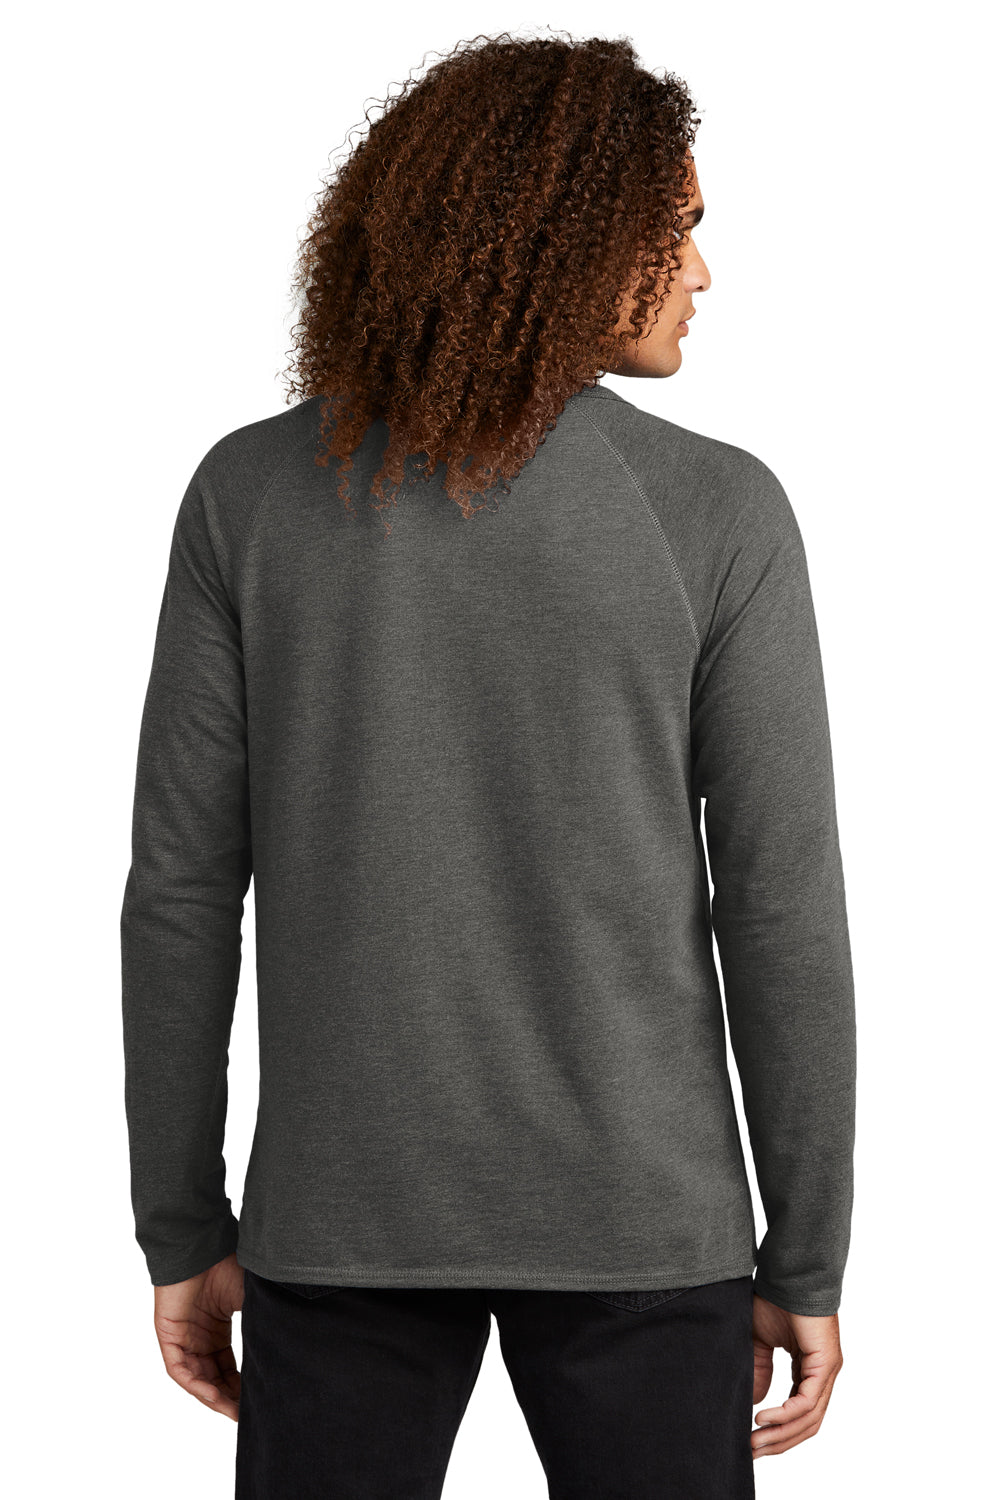 District Mens French Terry Long Sleeve Crewneck Sweatshirt Washed Coal Grey Back